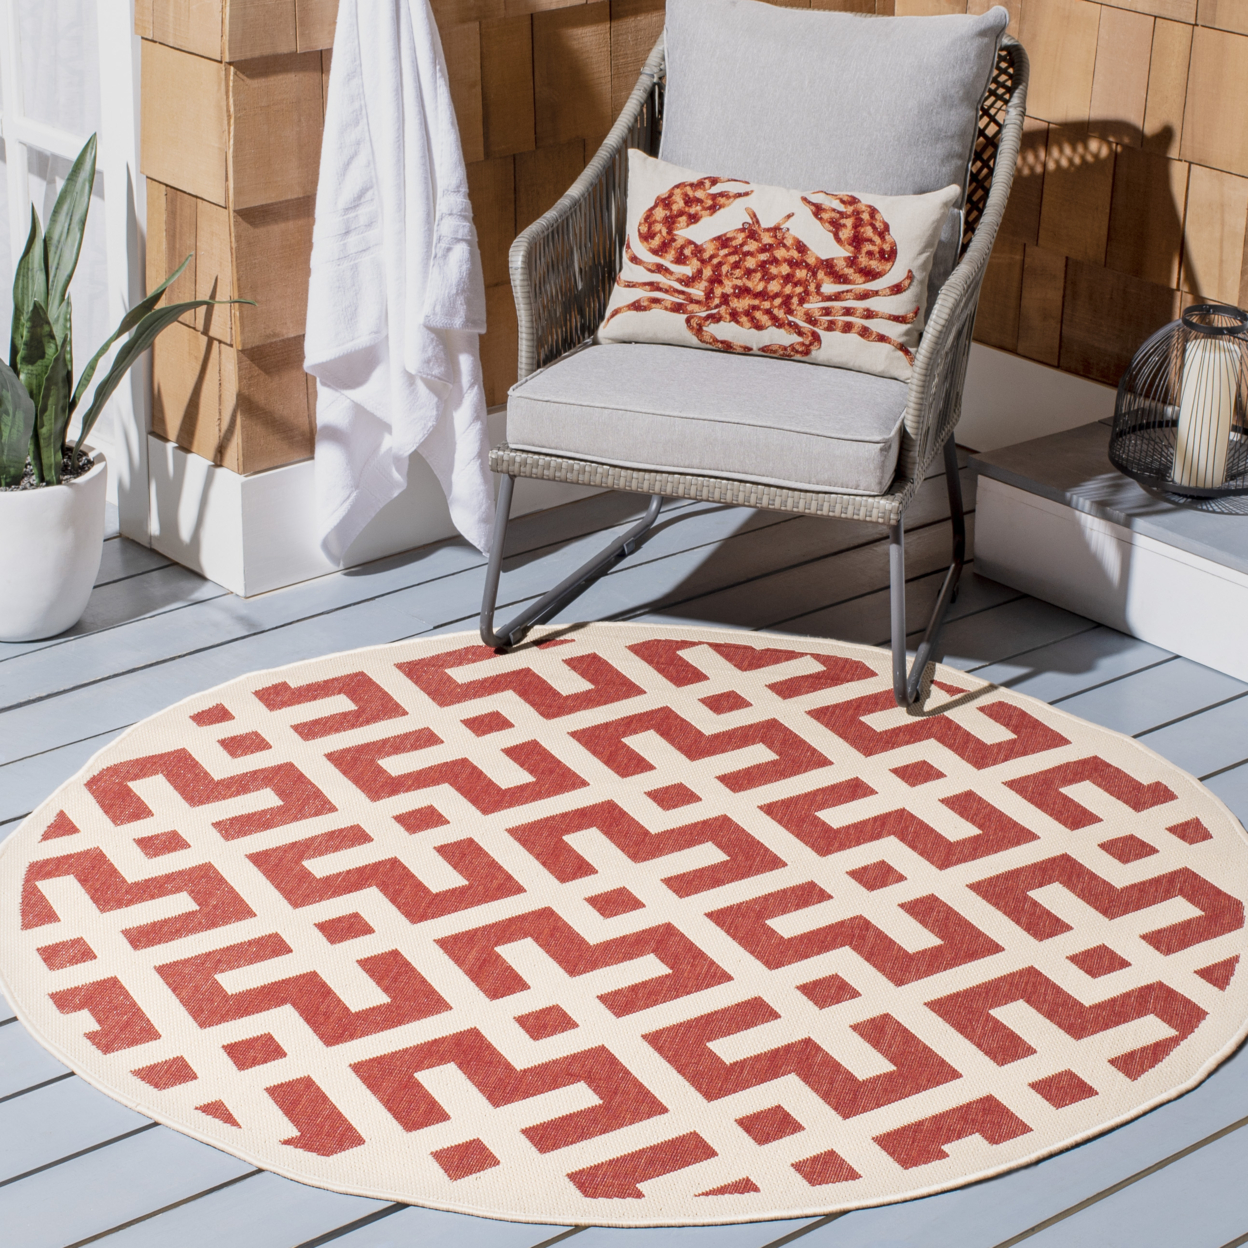 SAFAVIEH Outdoor CY6915-238 Courtyard Collection Red / Bone Rug - 2' 3 X 12'